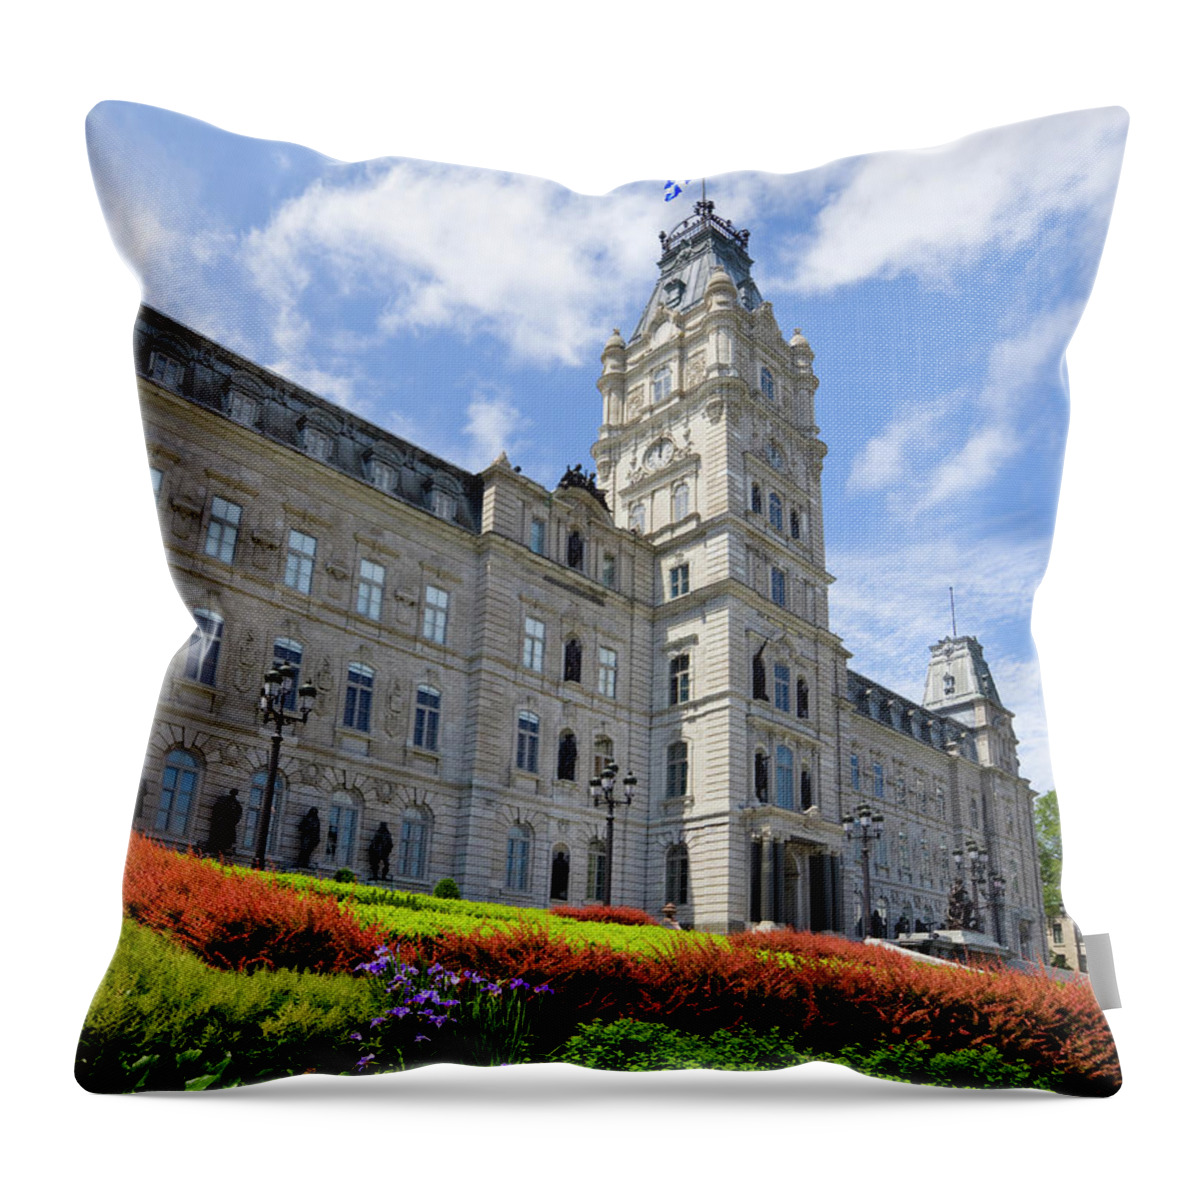 Flowerbed Throw Pillow featuring the photograph Quebec City, Canada by Benedek